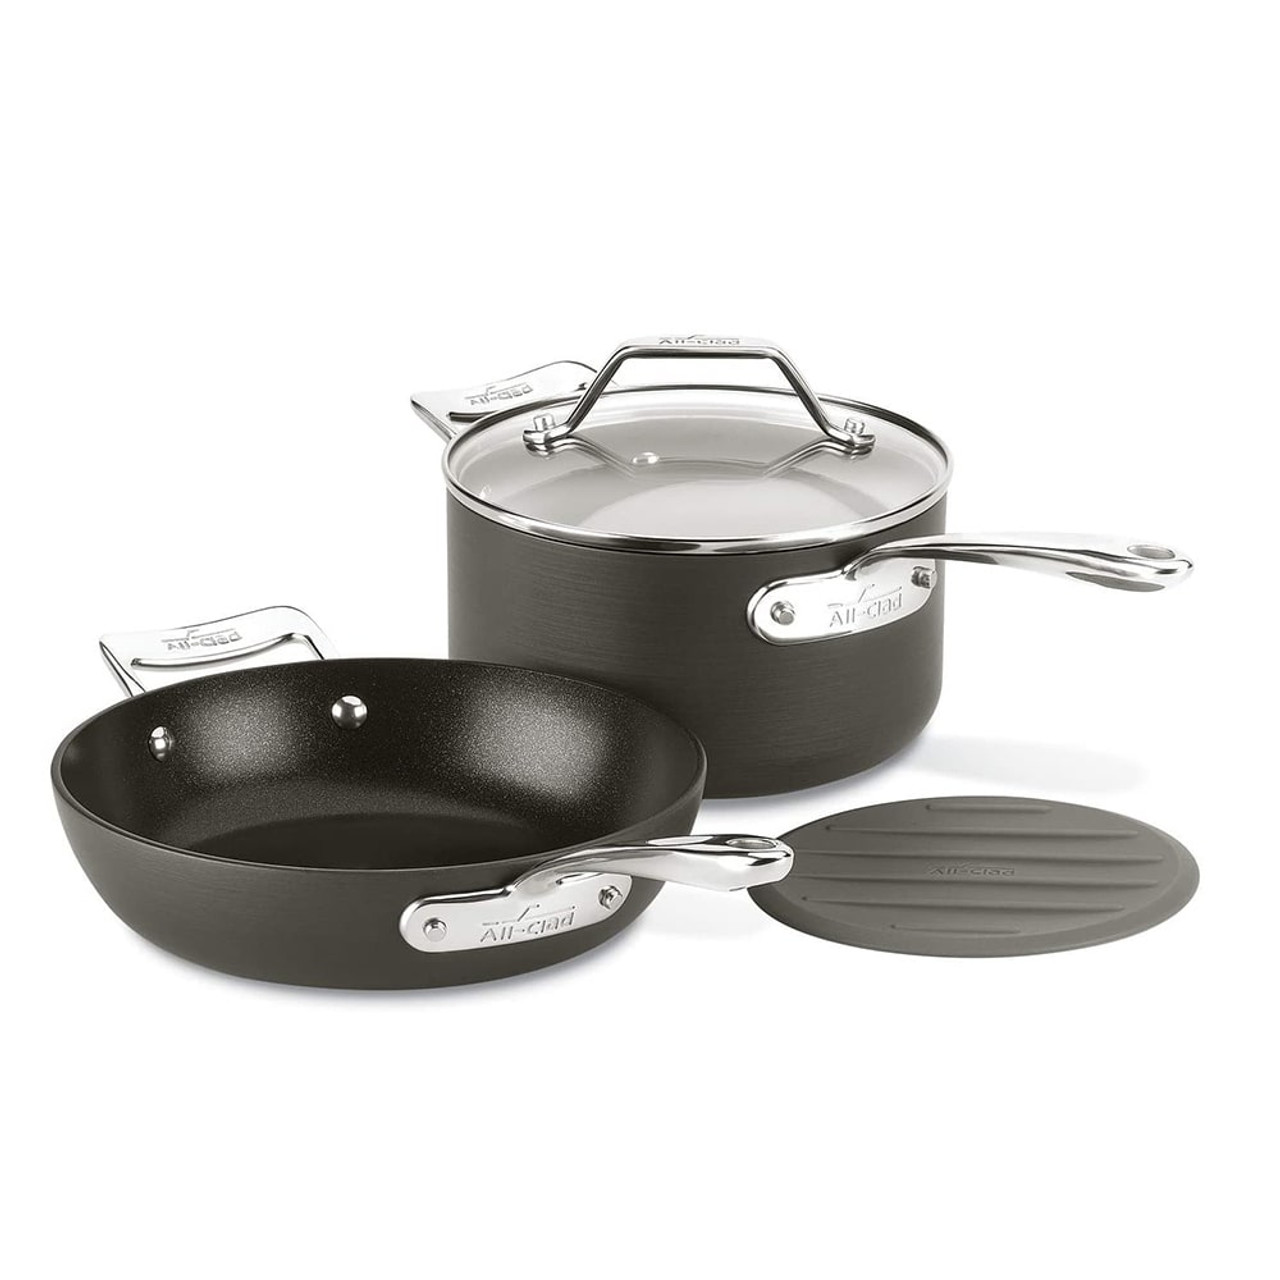 https://cdn11.bigcommerce.com/s-hccytny0od/images/stencil/1280x1280/products/3570/12745/all-clad-essentials-nonstick-small-fry-pan-sauce-pan-set__37458.1601383466.jpg?c=2?imbypass=on